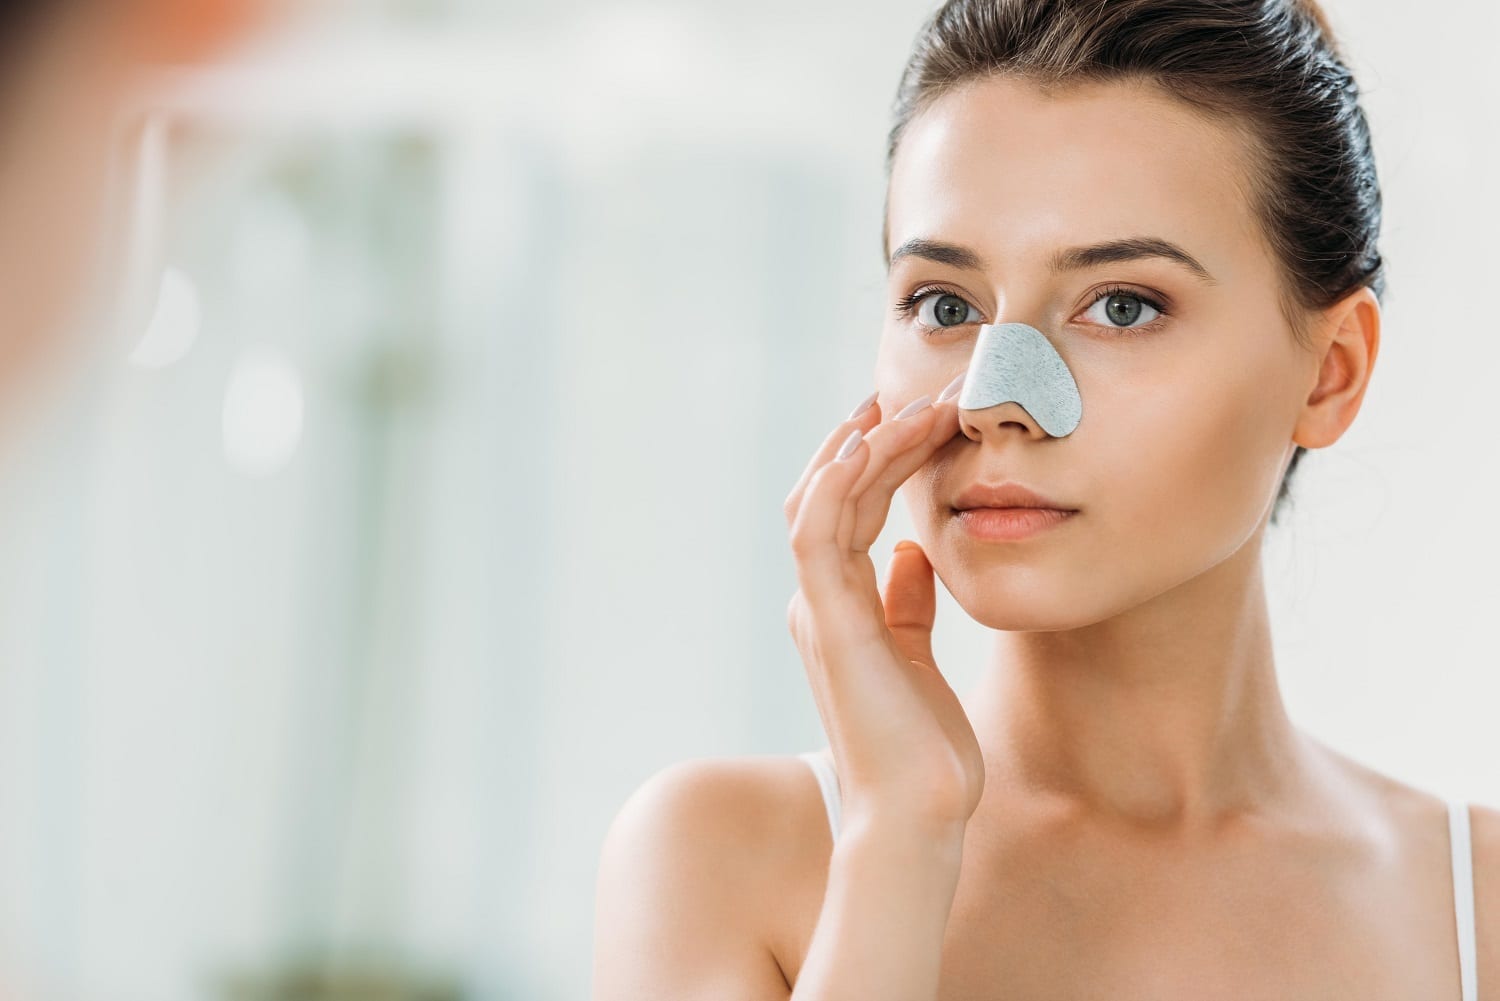 Get Rid of Blackheads without Harming Your Skin